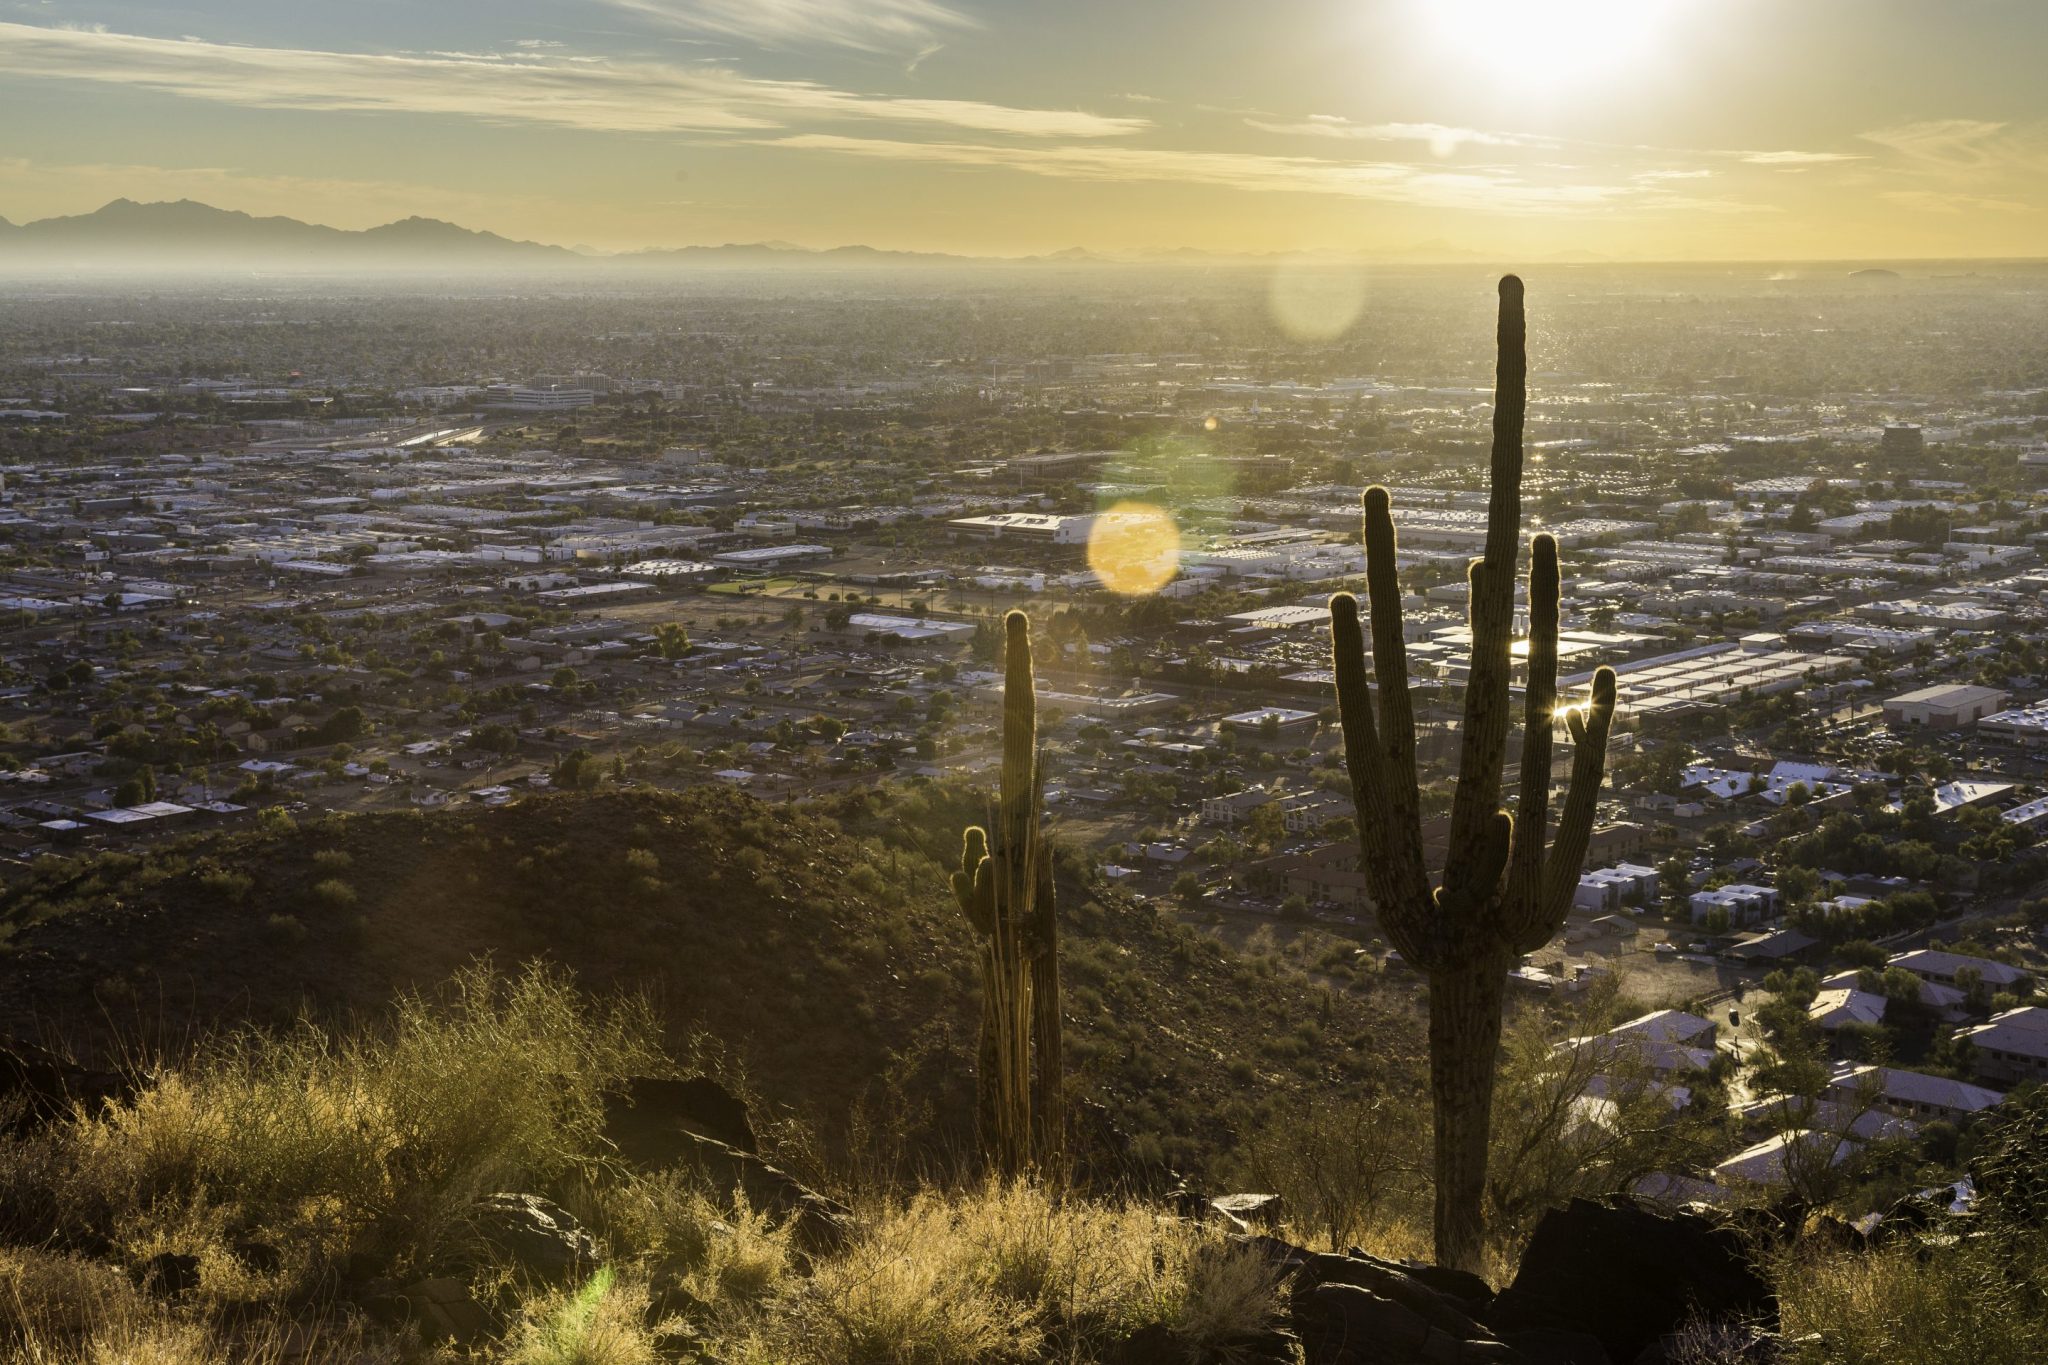 Phoenix has driest year since at least 1895, National Weather Service finds